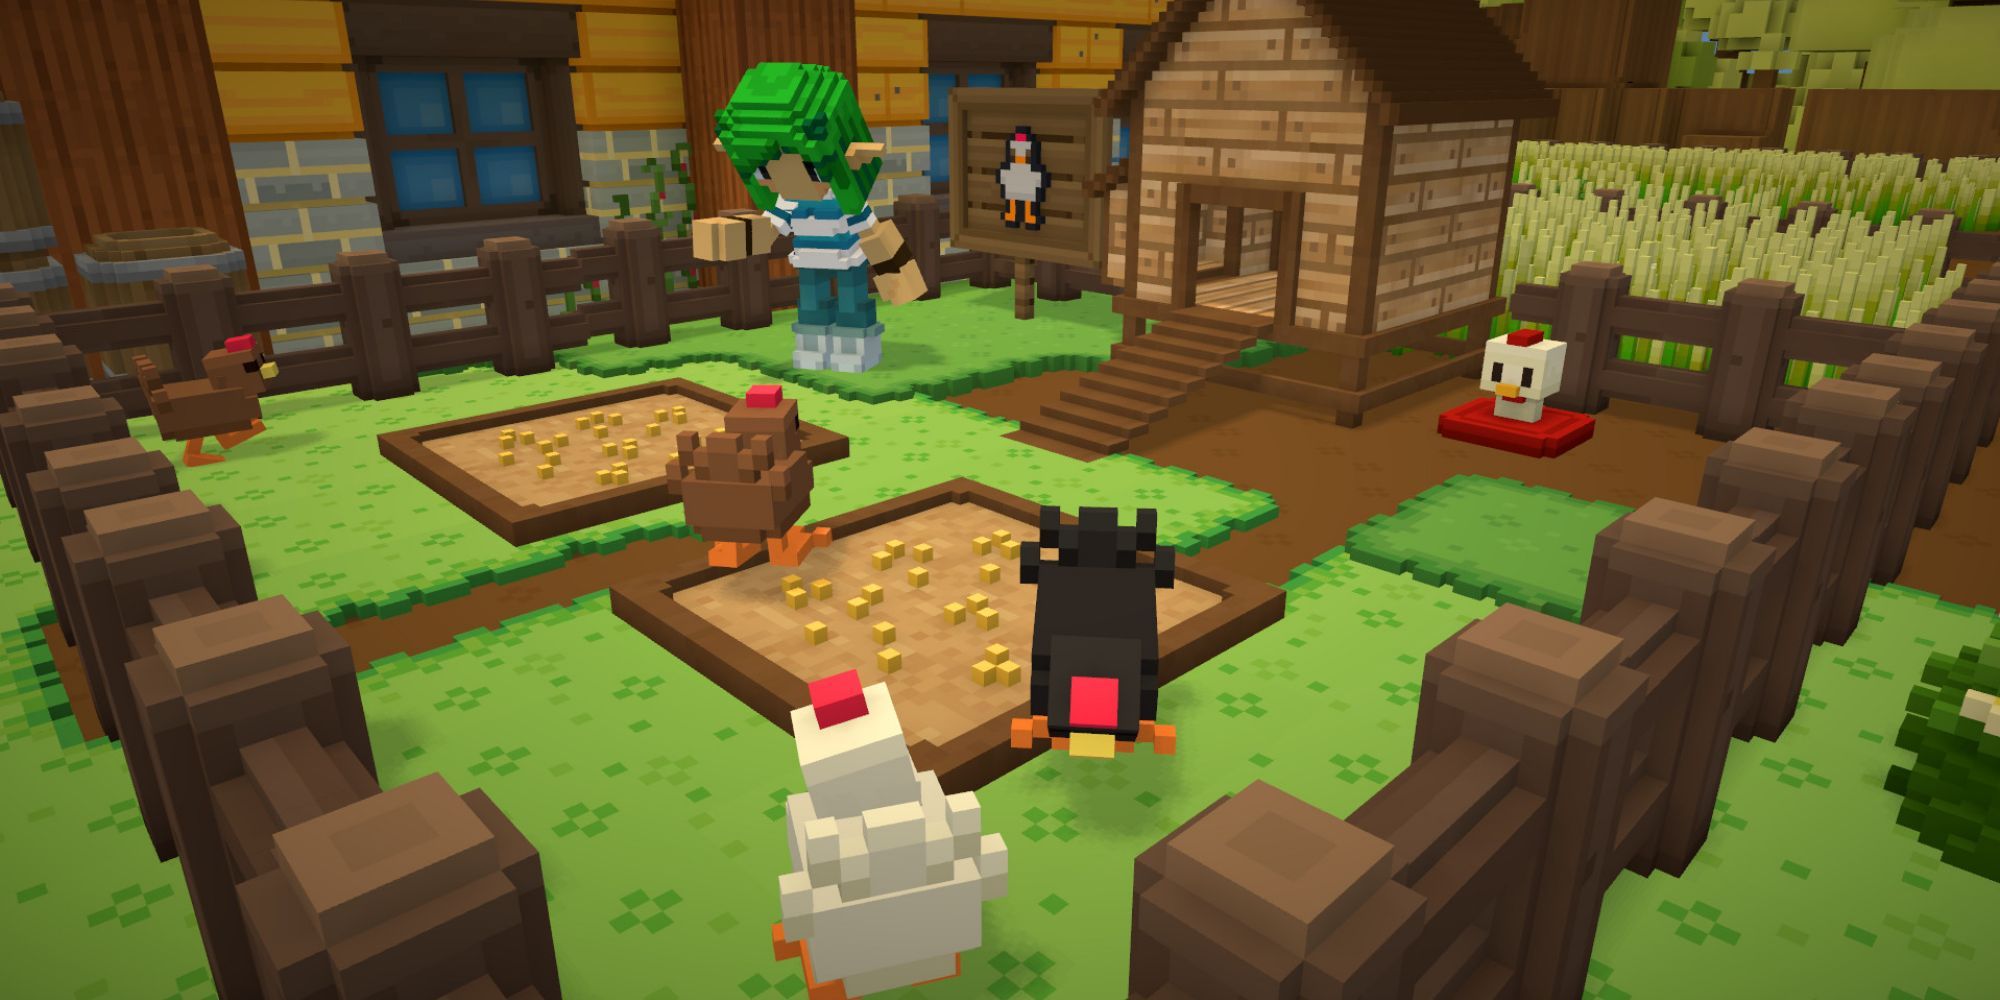 A farmer feeds four of their chickens in Staxel